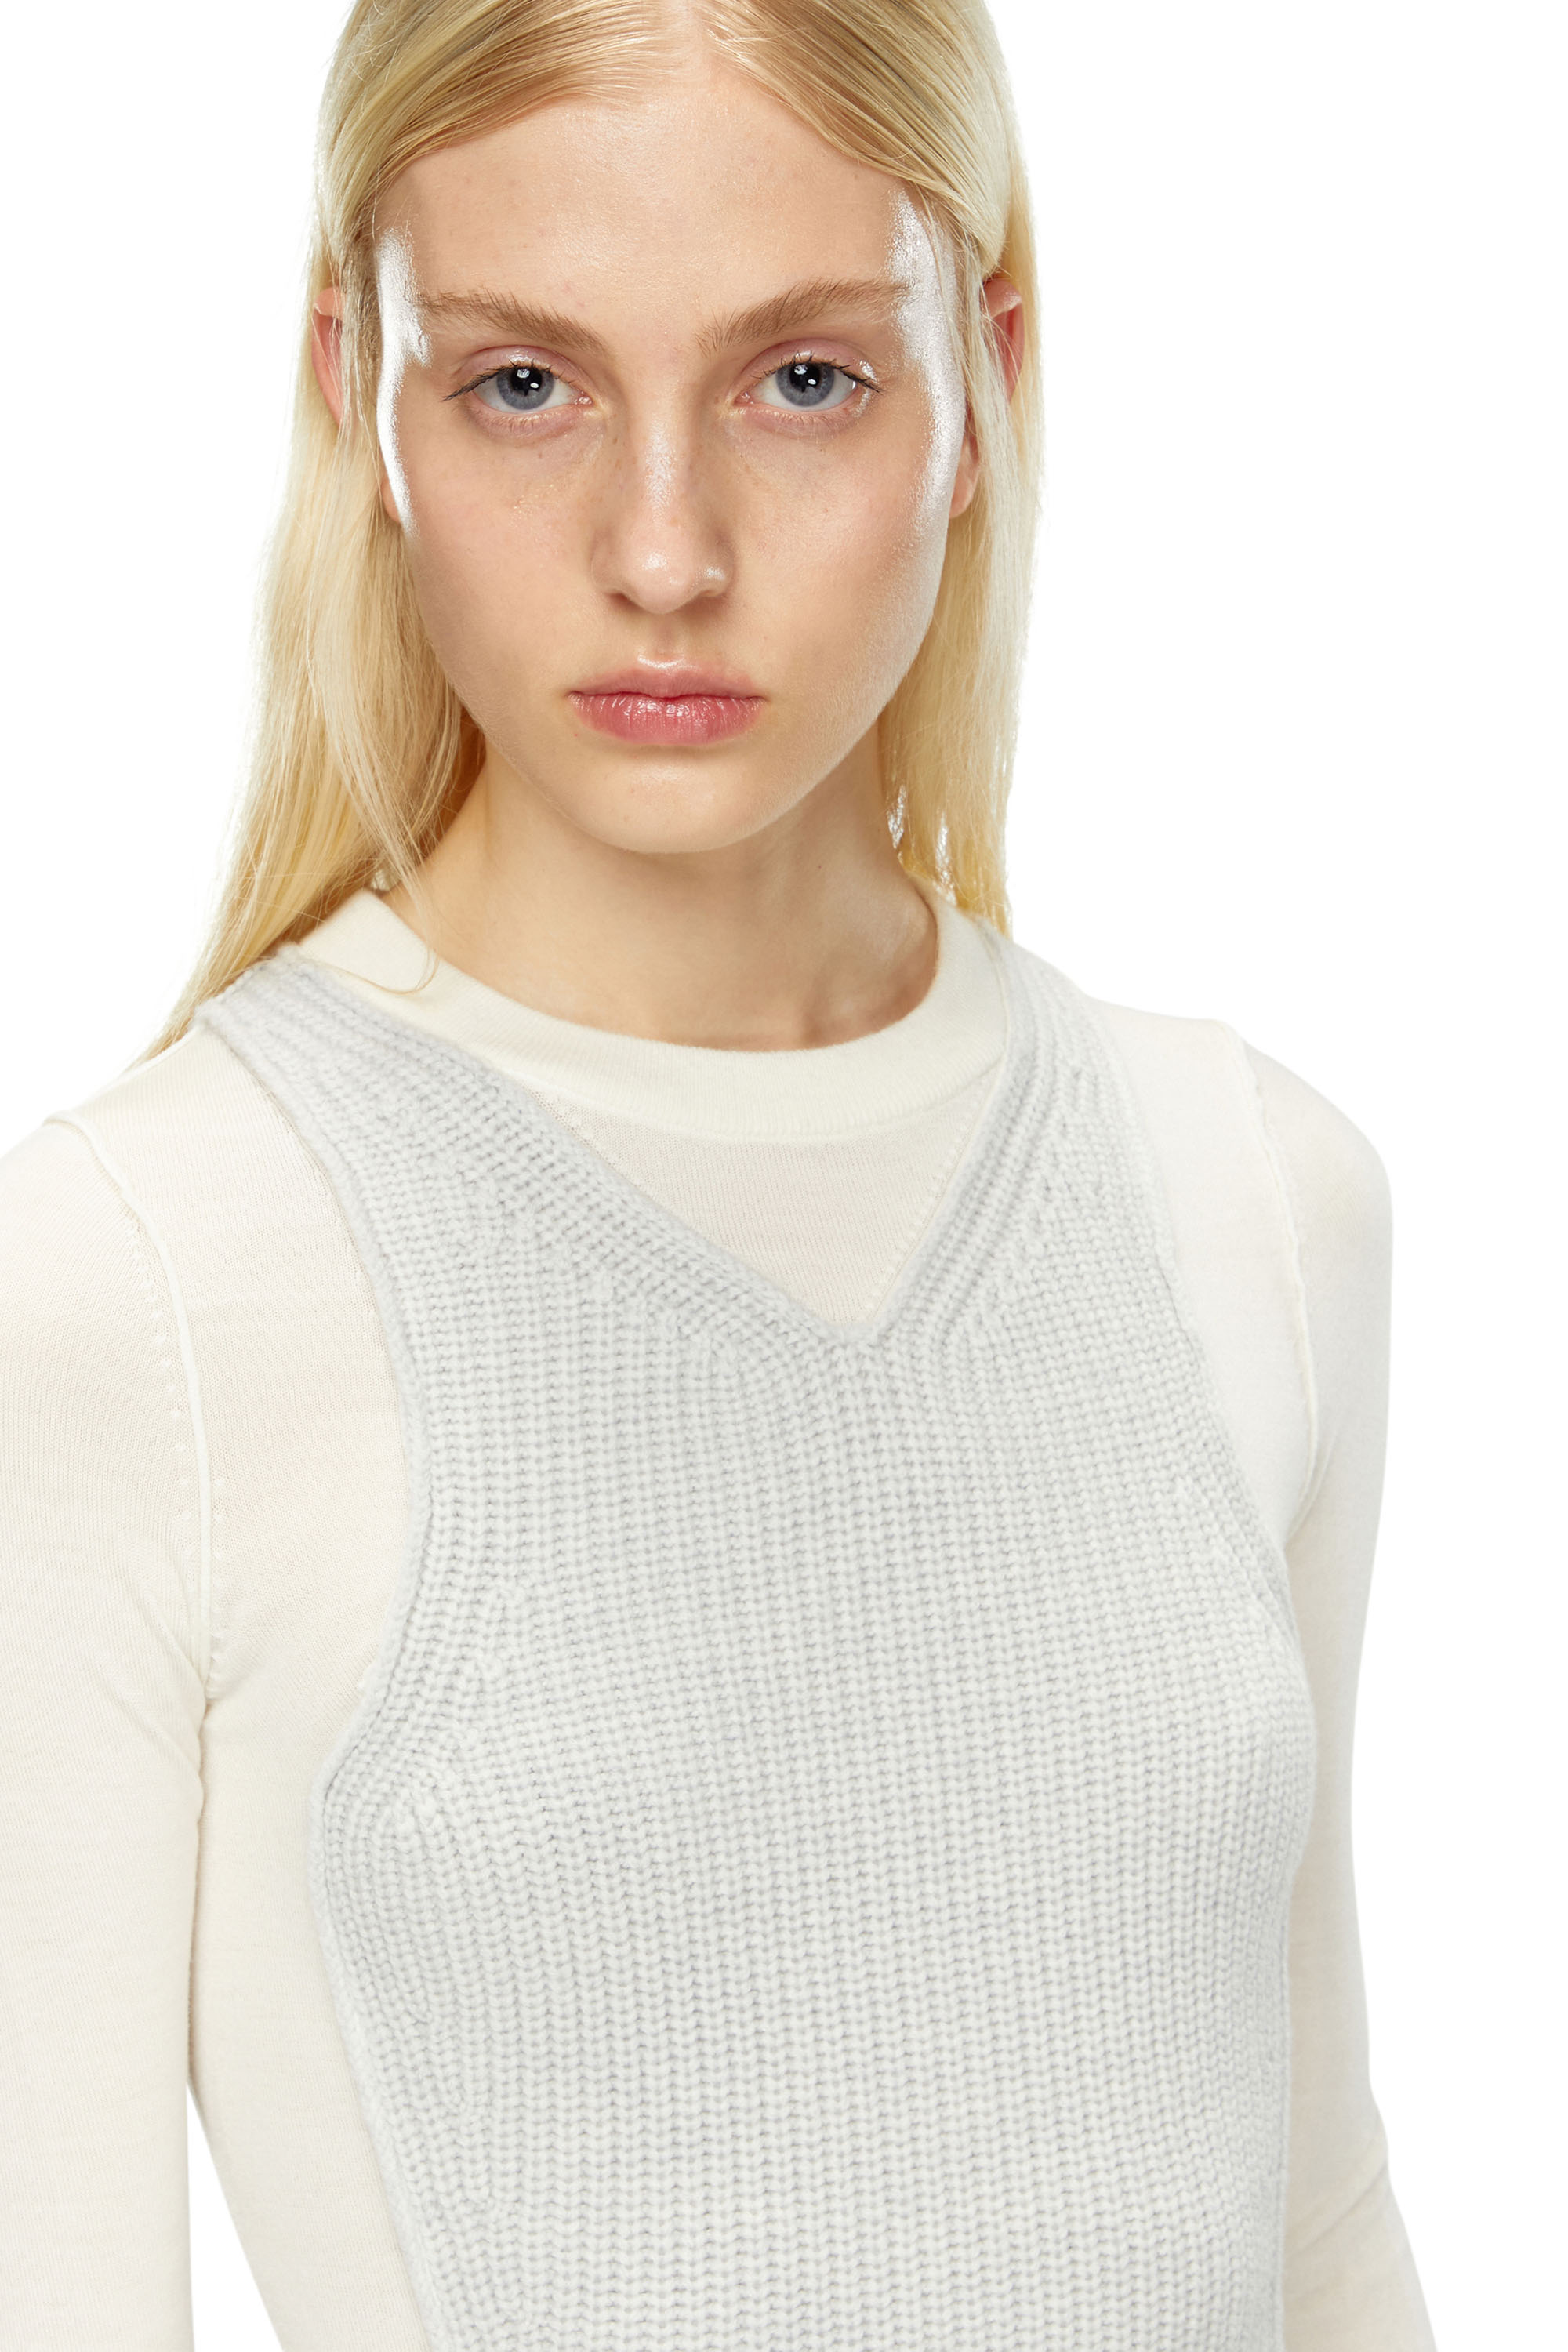 Diesel - M-ARENA, Woman Short knit dress with layered effect in White - Image 4